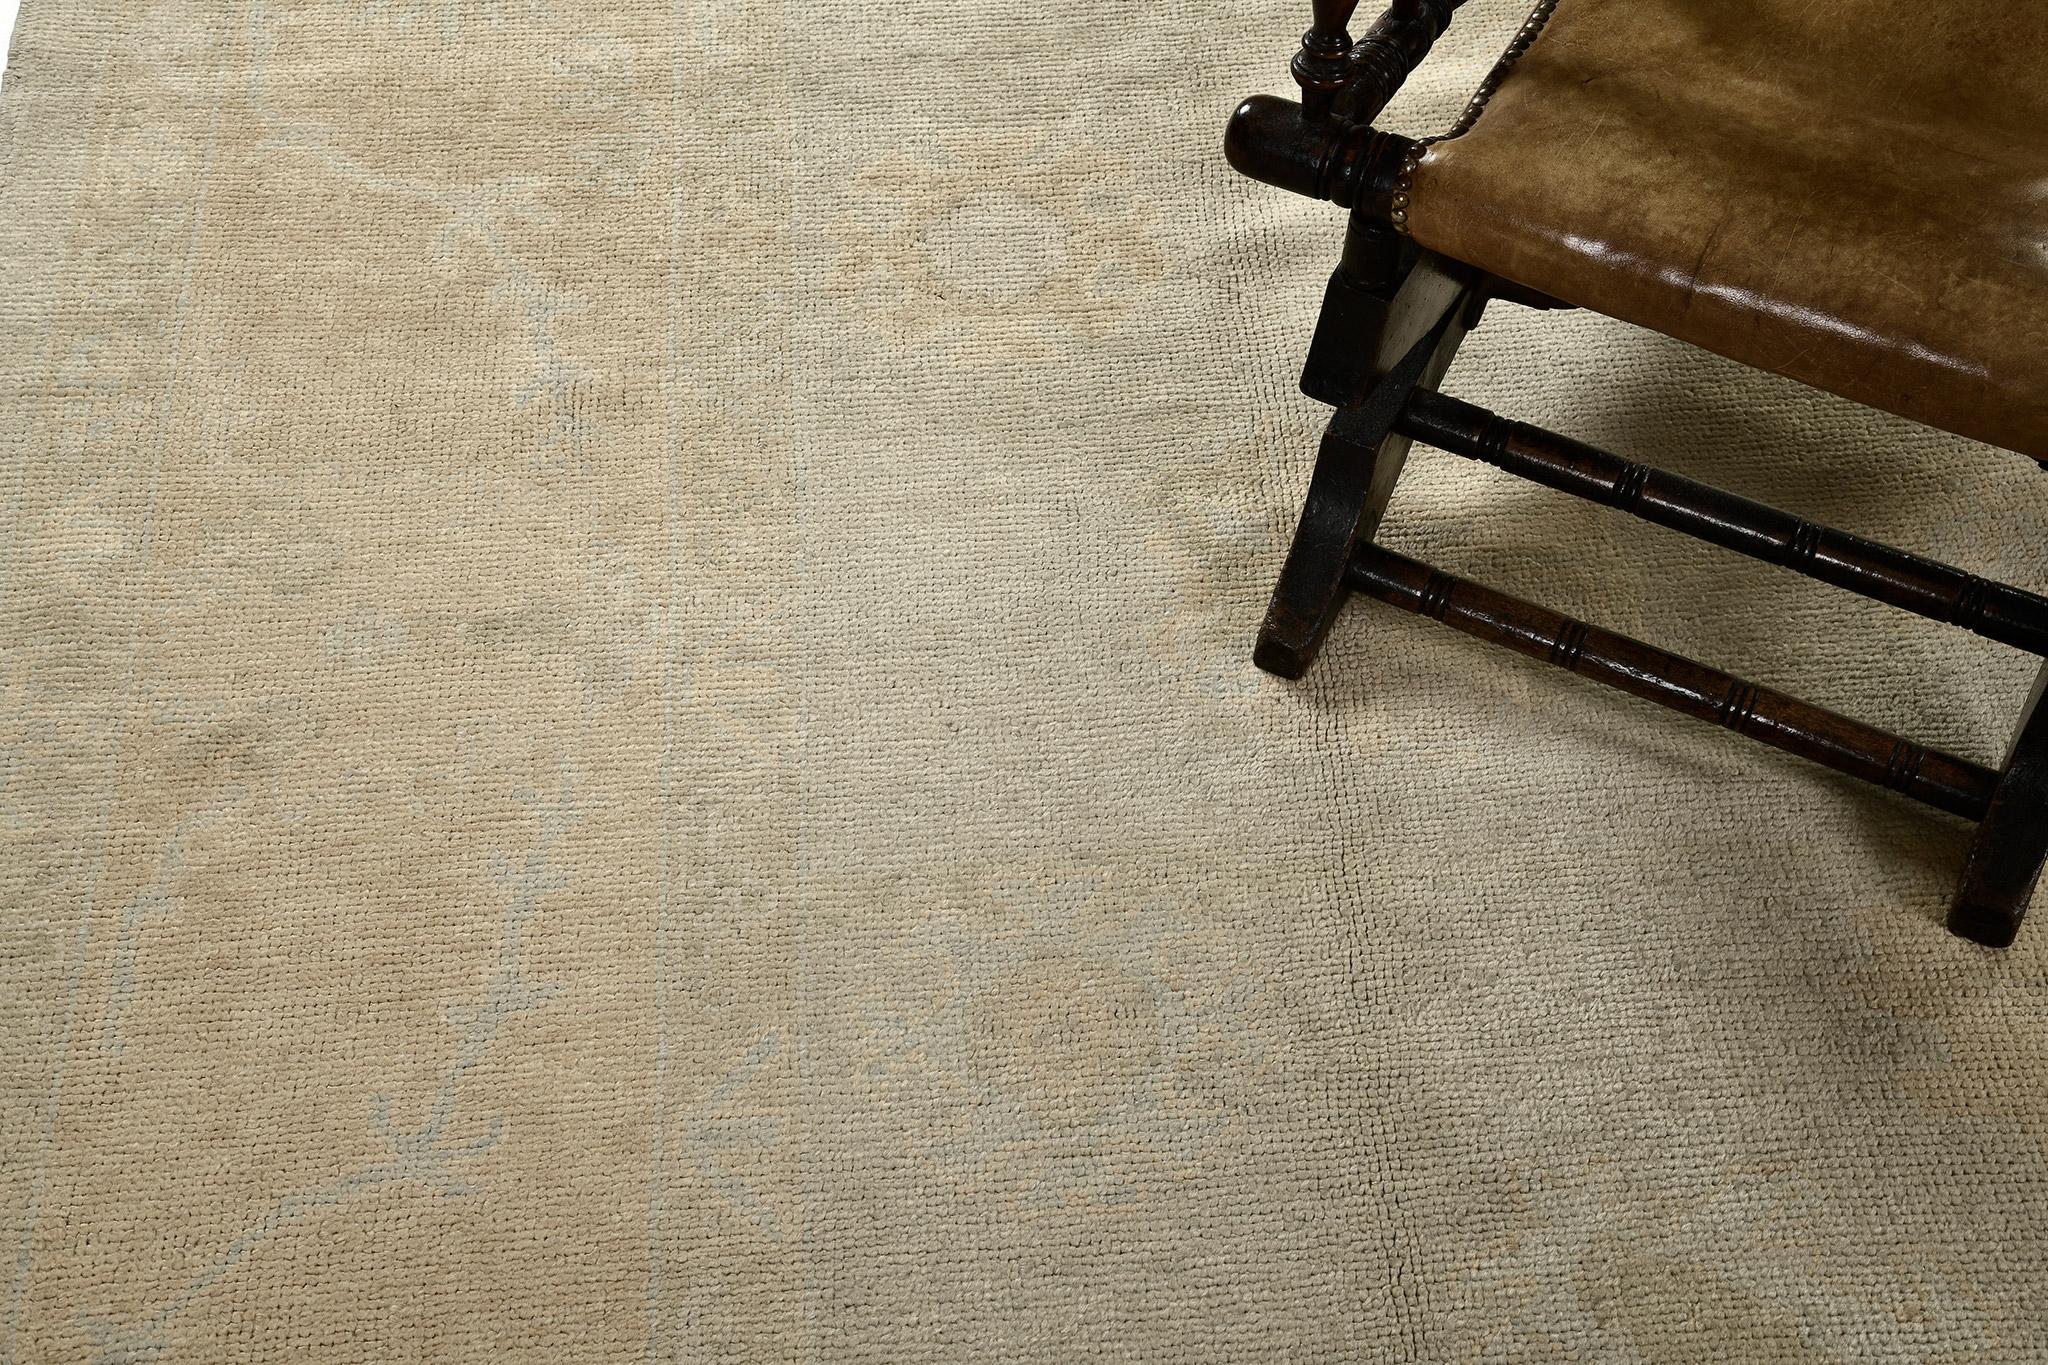 A captivating sandy beige and dusty blue muted revival of Oushak design rug that was made from the finest selection of natural dye and hand spun wool. The rustic character of this breathtaking rug will tone down a formal design scheme and give your